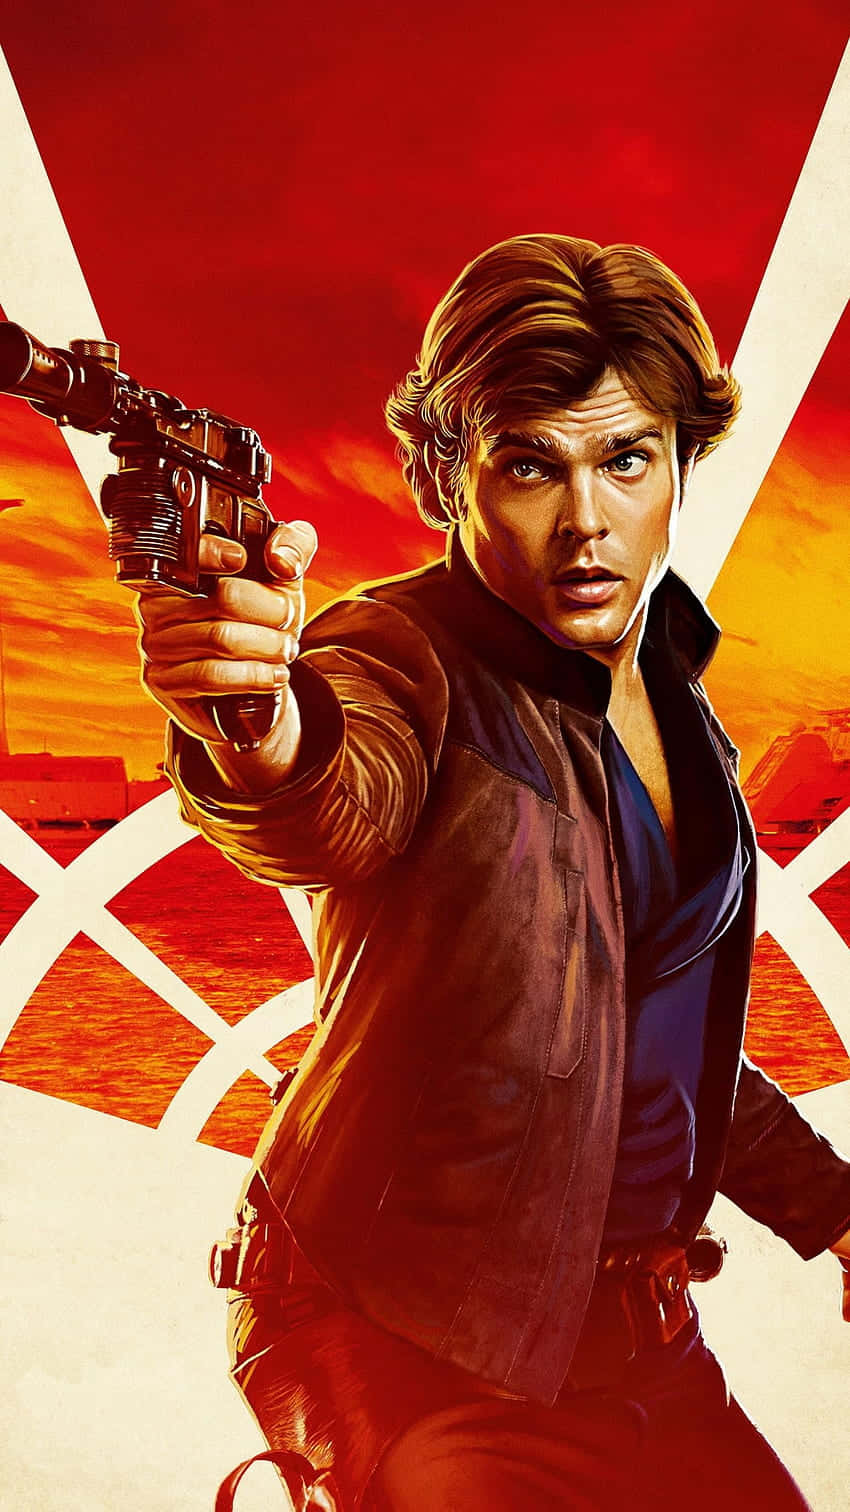 Han Solo and Chewbacca in Solo: A Star Wars Story Wallpaper